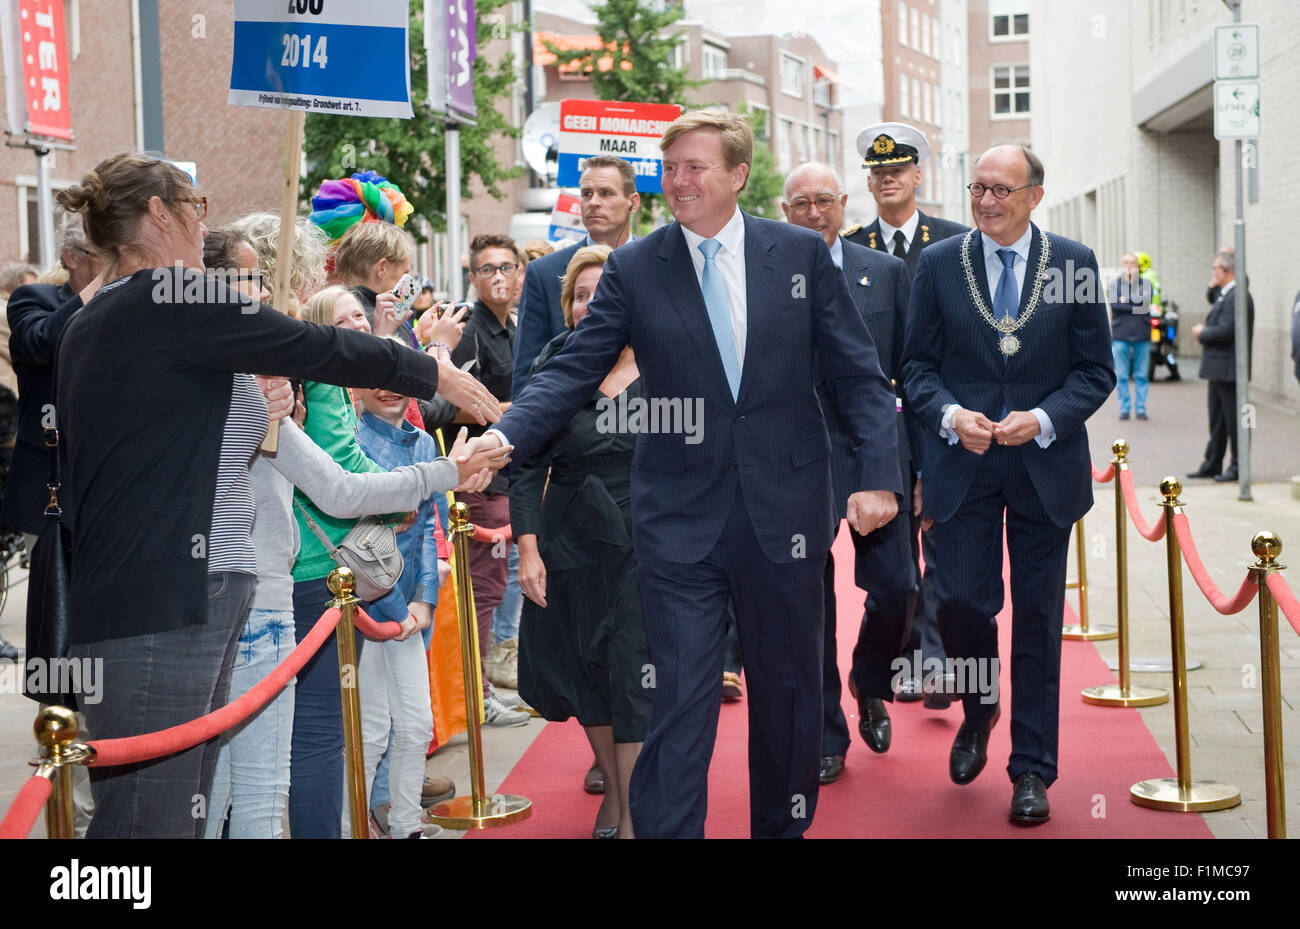 King Willem Alexander from The Netherlands is shaking hands with people while he is going to visit a theater Stock Photo